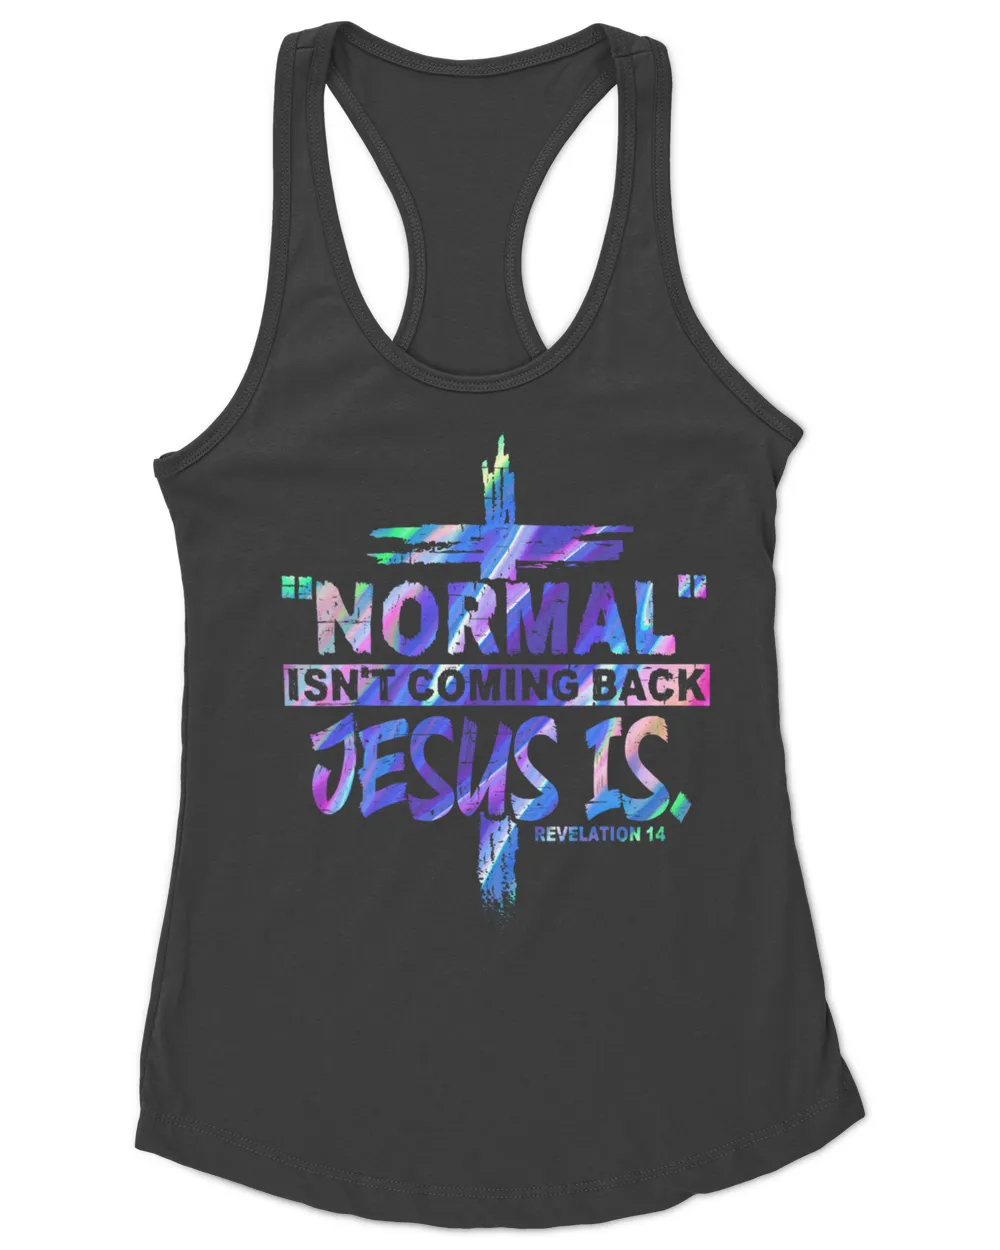 Normal Isn't Coming Back But Jesus Is Revelation 14